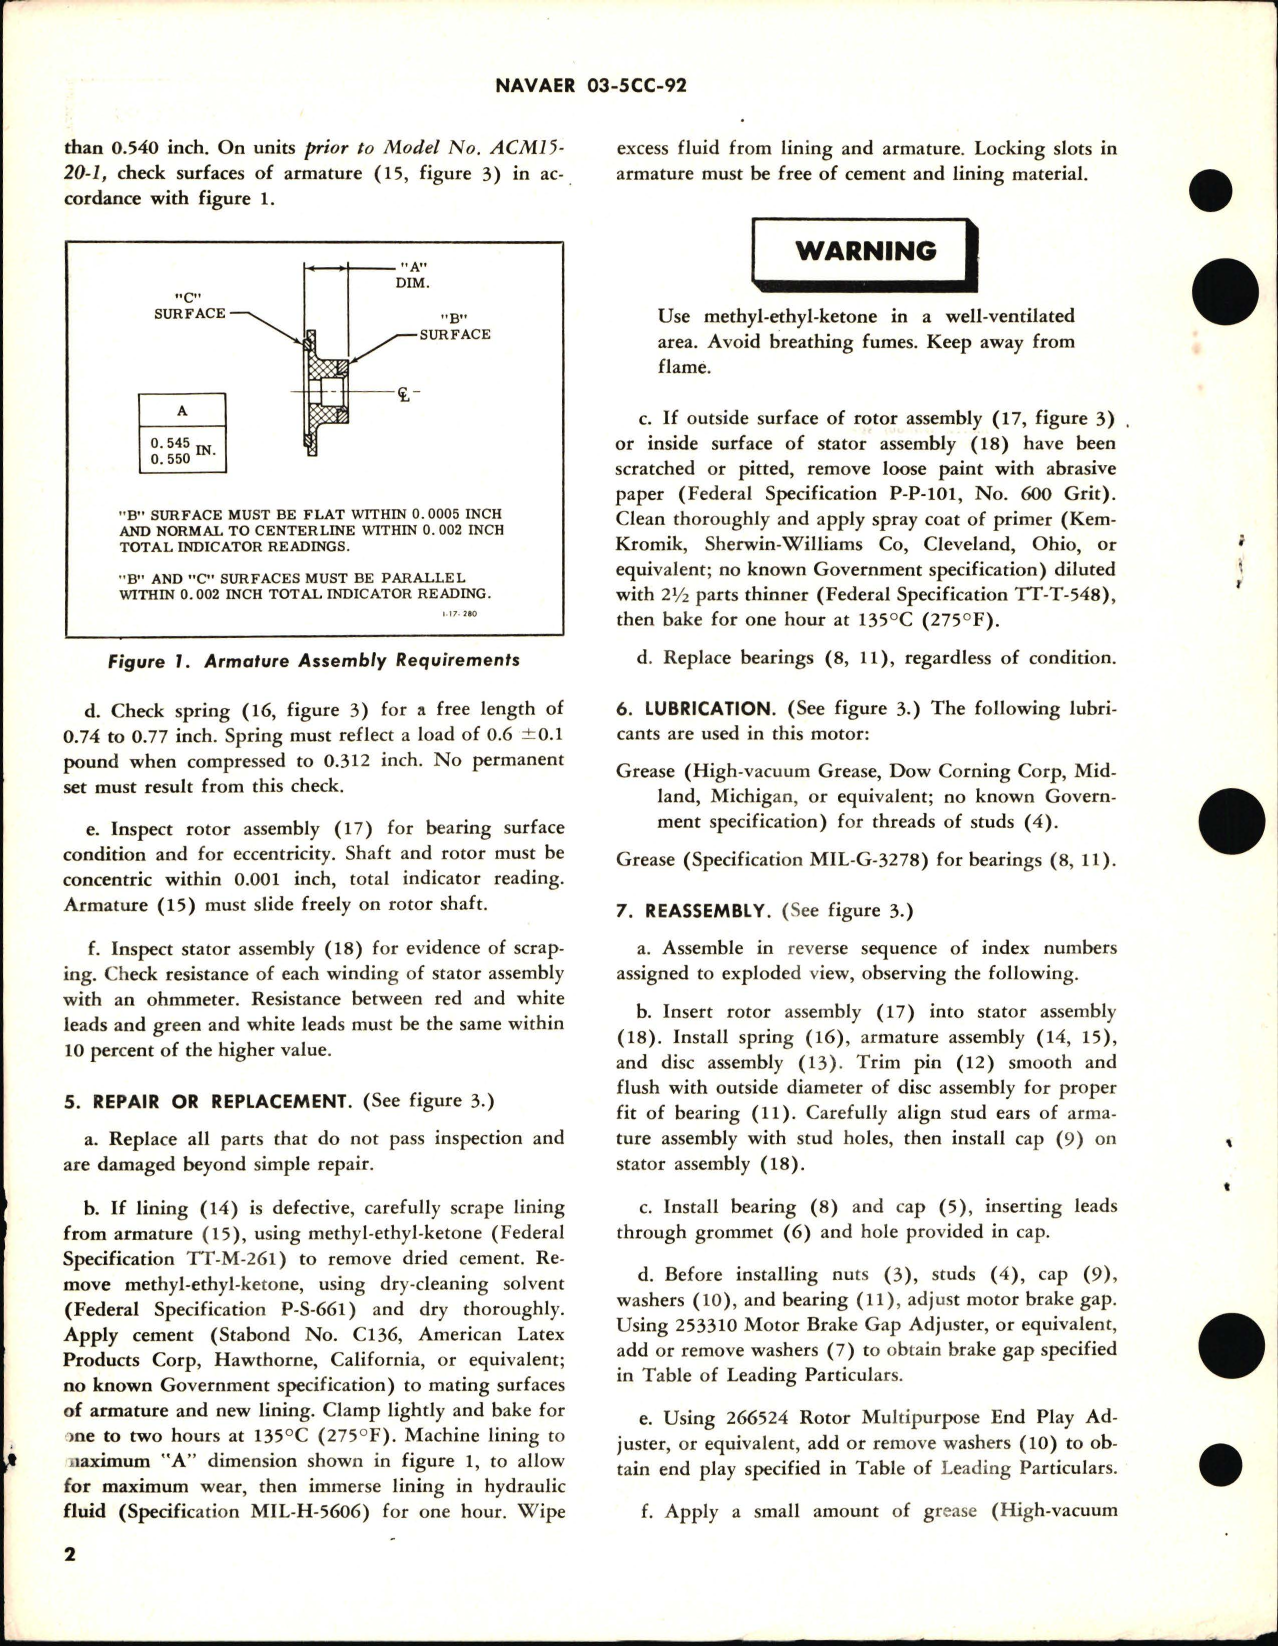 Sample page 2 from AirCorps Library document: Overhaul Instructions w Parts Breakdown for HP Motor with Brake 0.025 Part 27770 